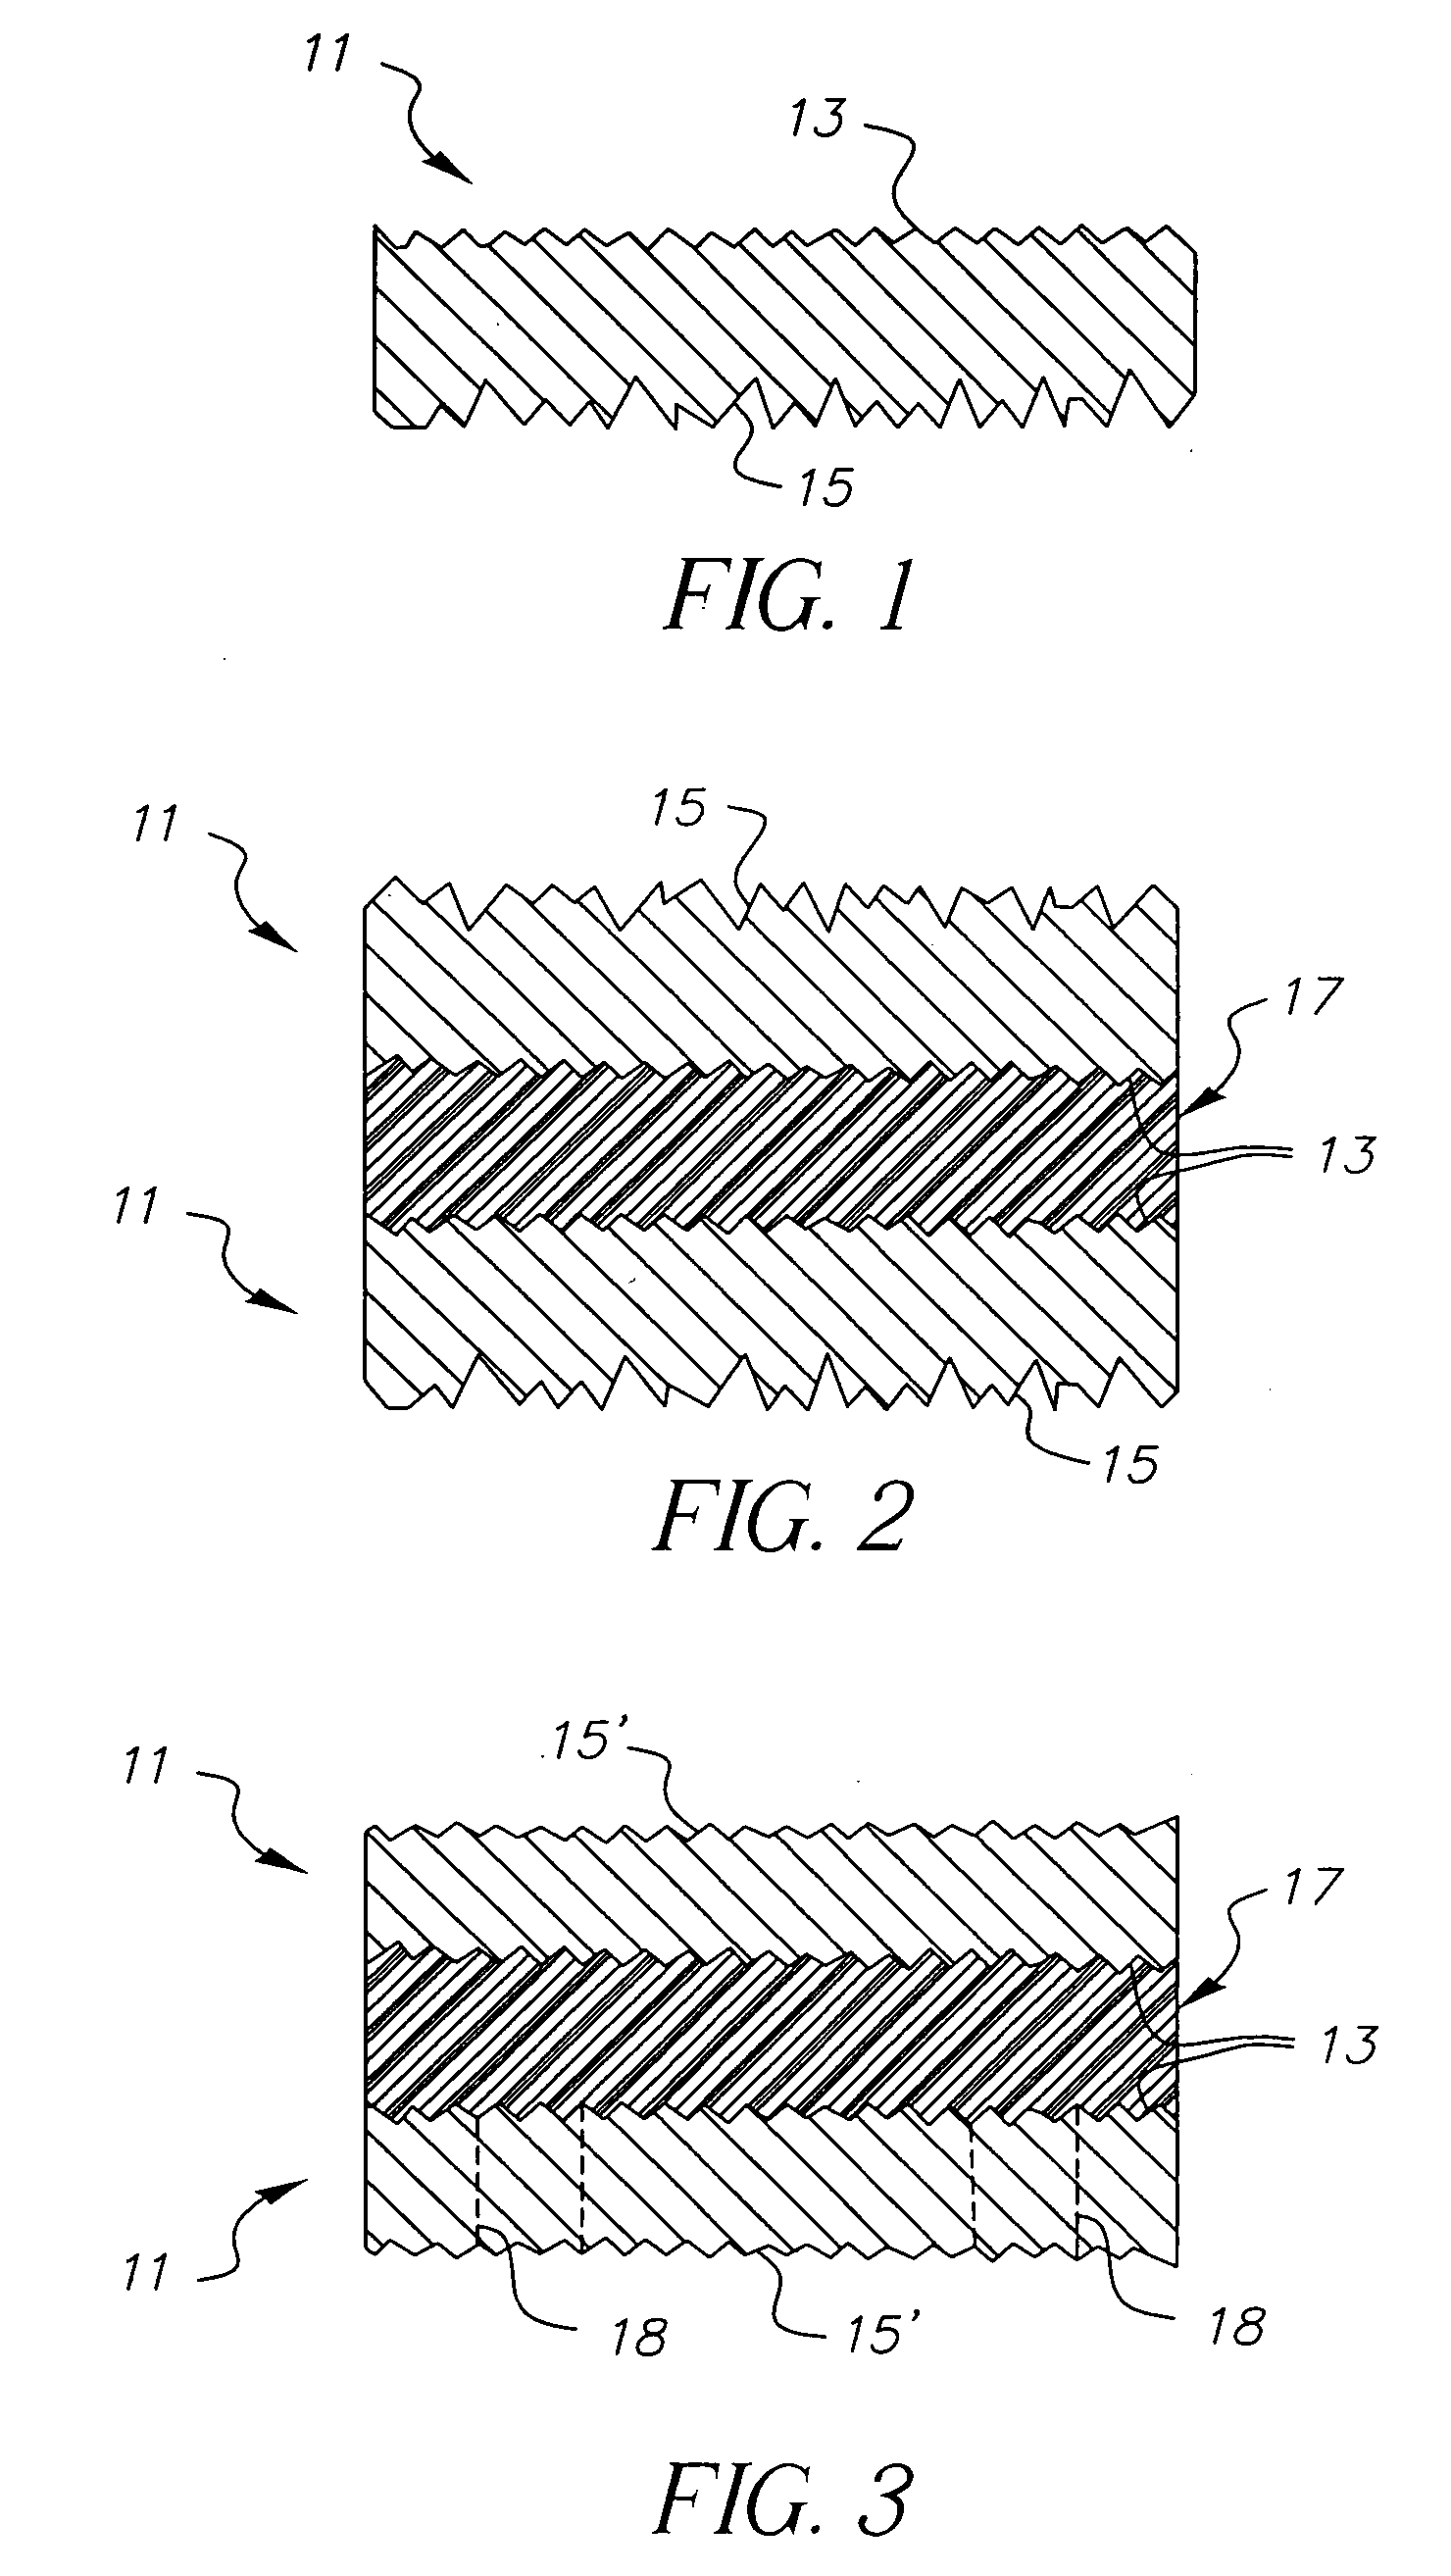 Circuitized substrates utilizing smooth-sided conductive layers as part thereof